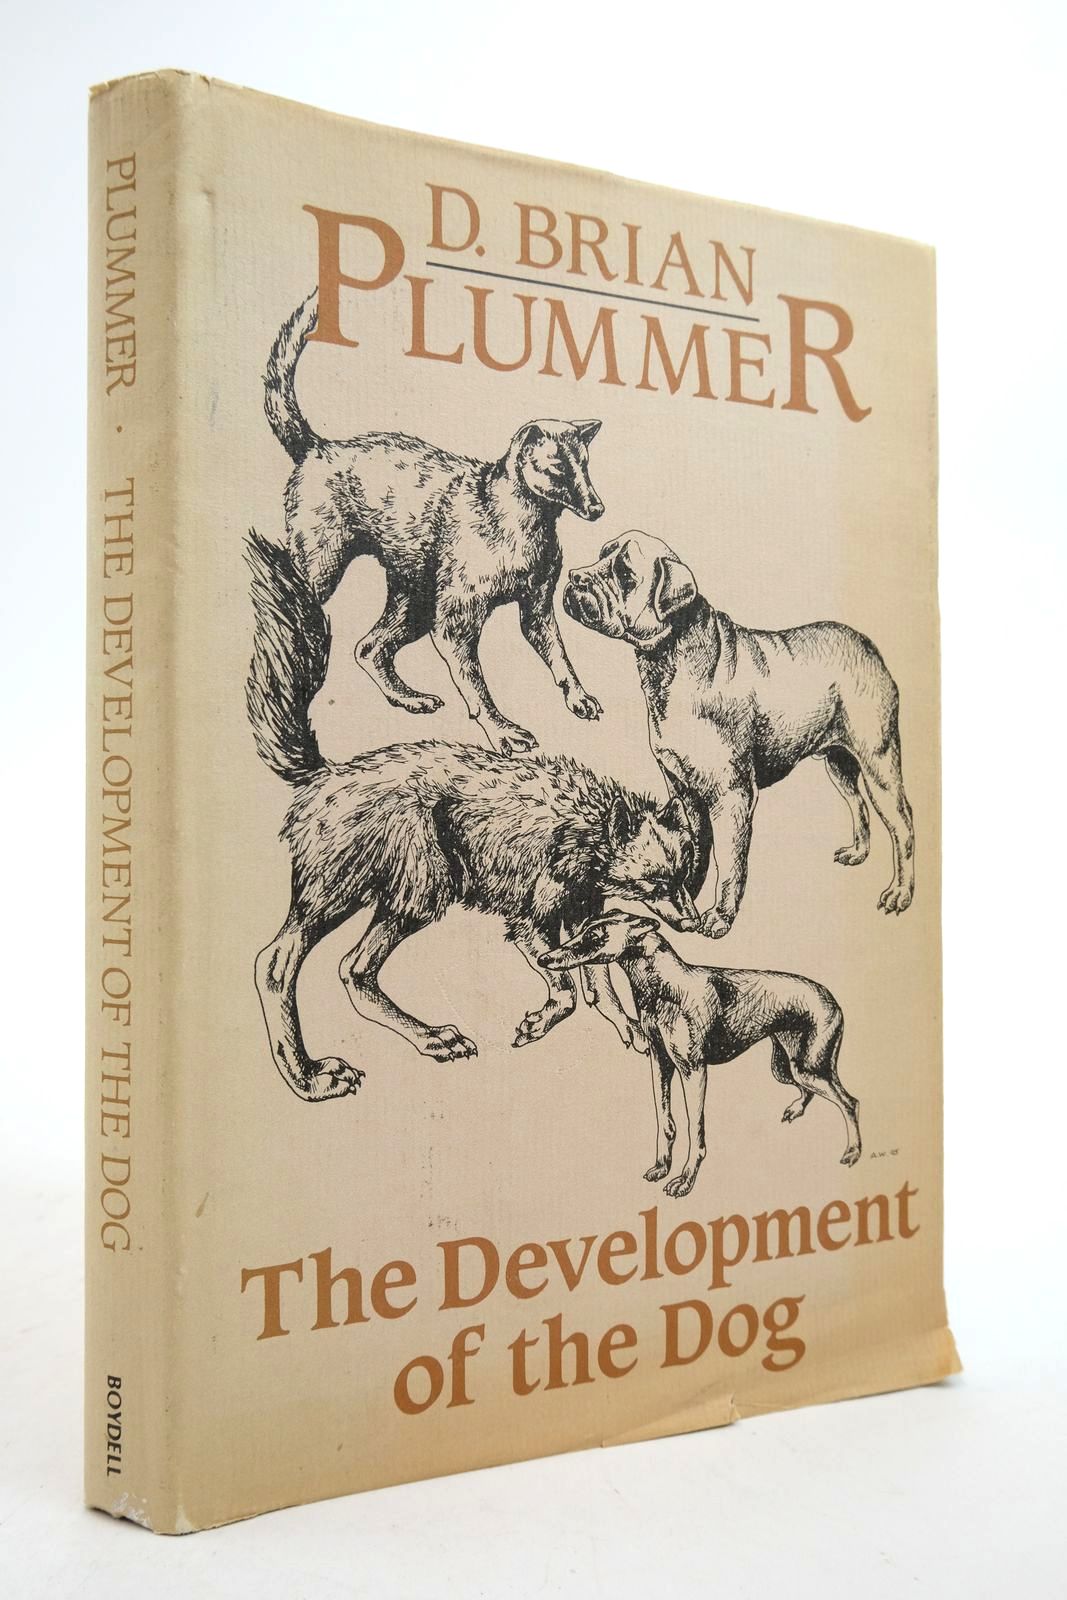 Photo of THE DEVELOPMENT OF THE DOG written by Plummer, David Brian published by The Boydell Press (STOCK CODE: 2139626)  for sale by Stella & Rose's Books